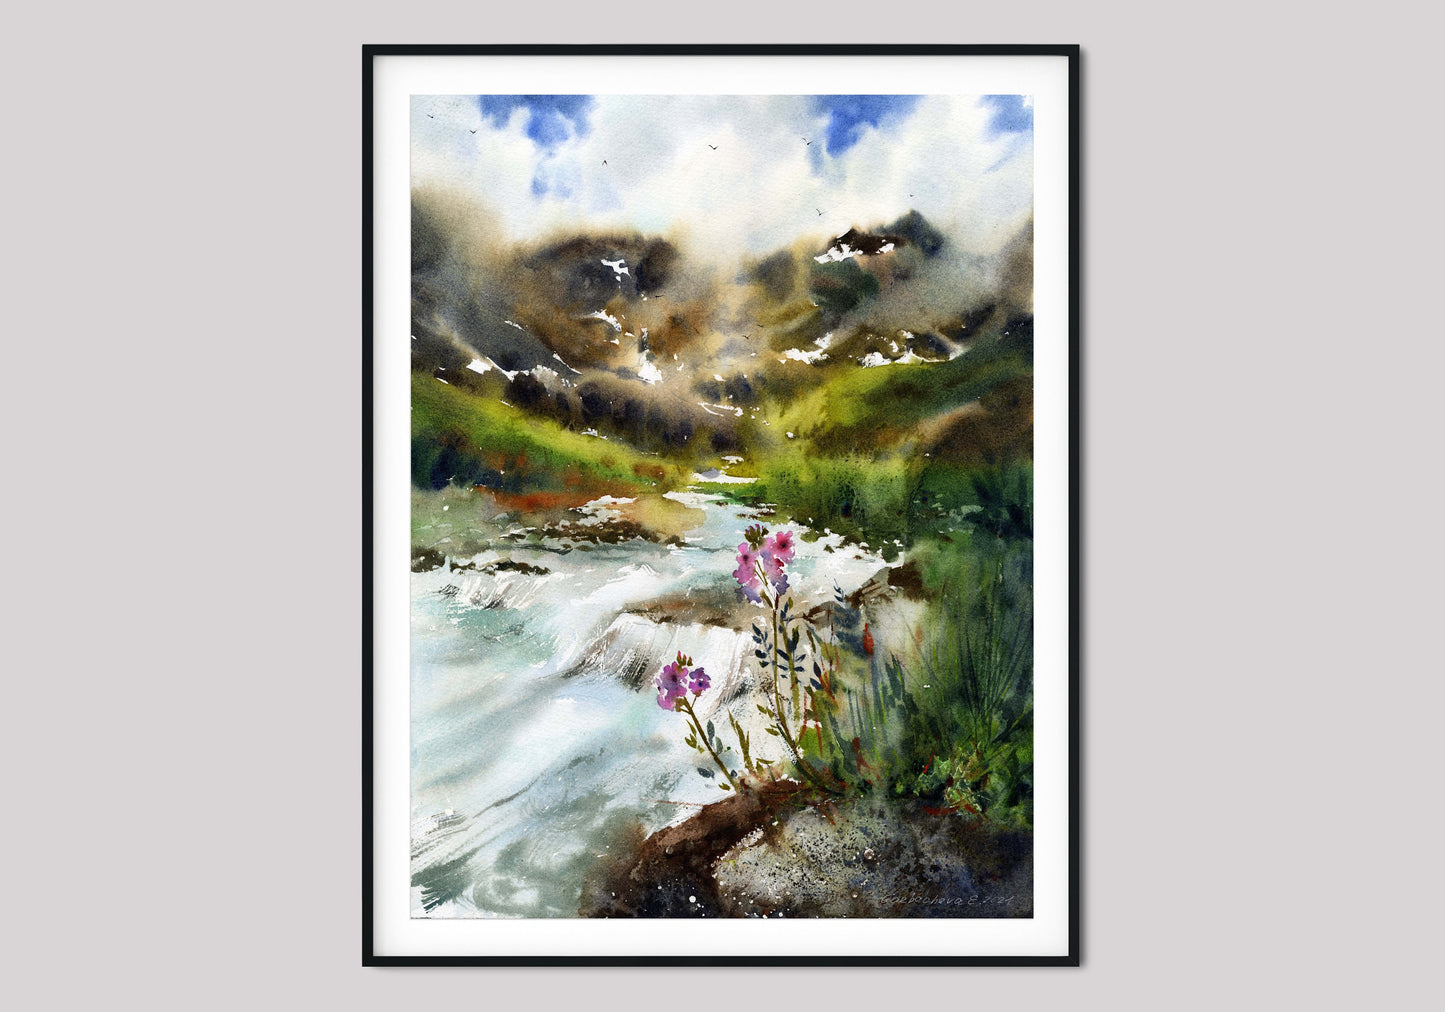 Mountain Wildflower Wall Art, Nature Art Decor, River Landscape Large Print, Contemporary Home & Office Wall Decoration